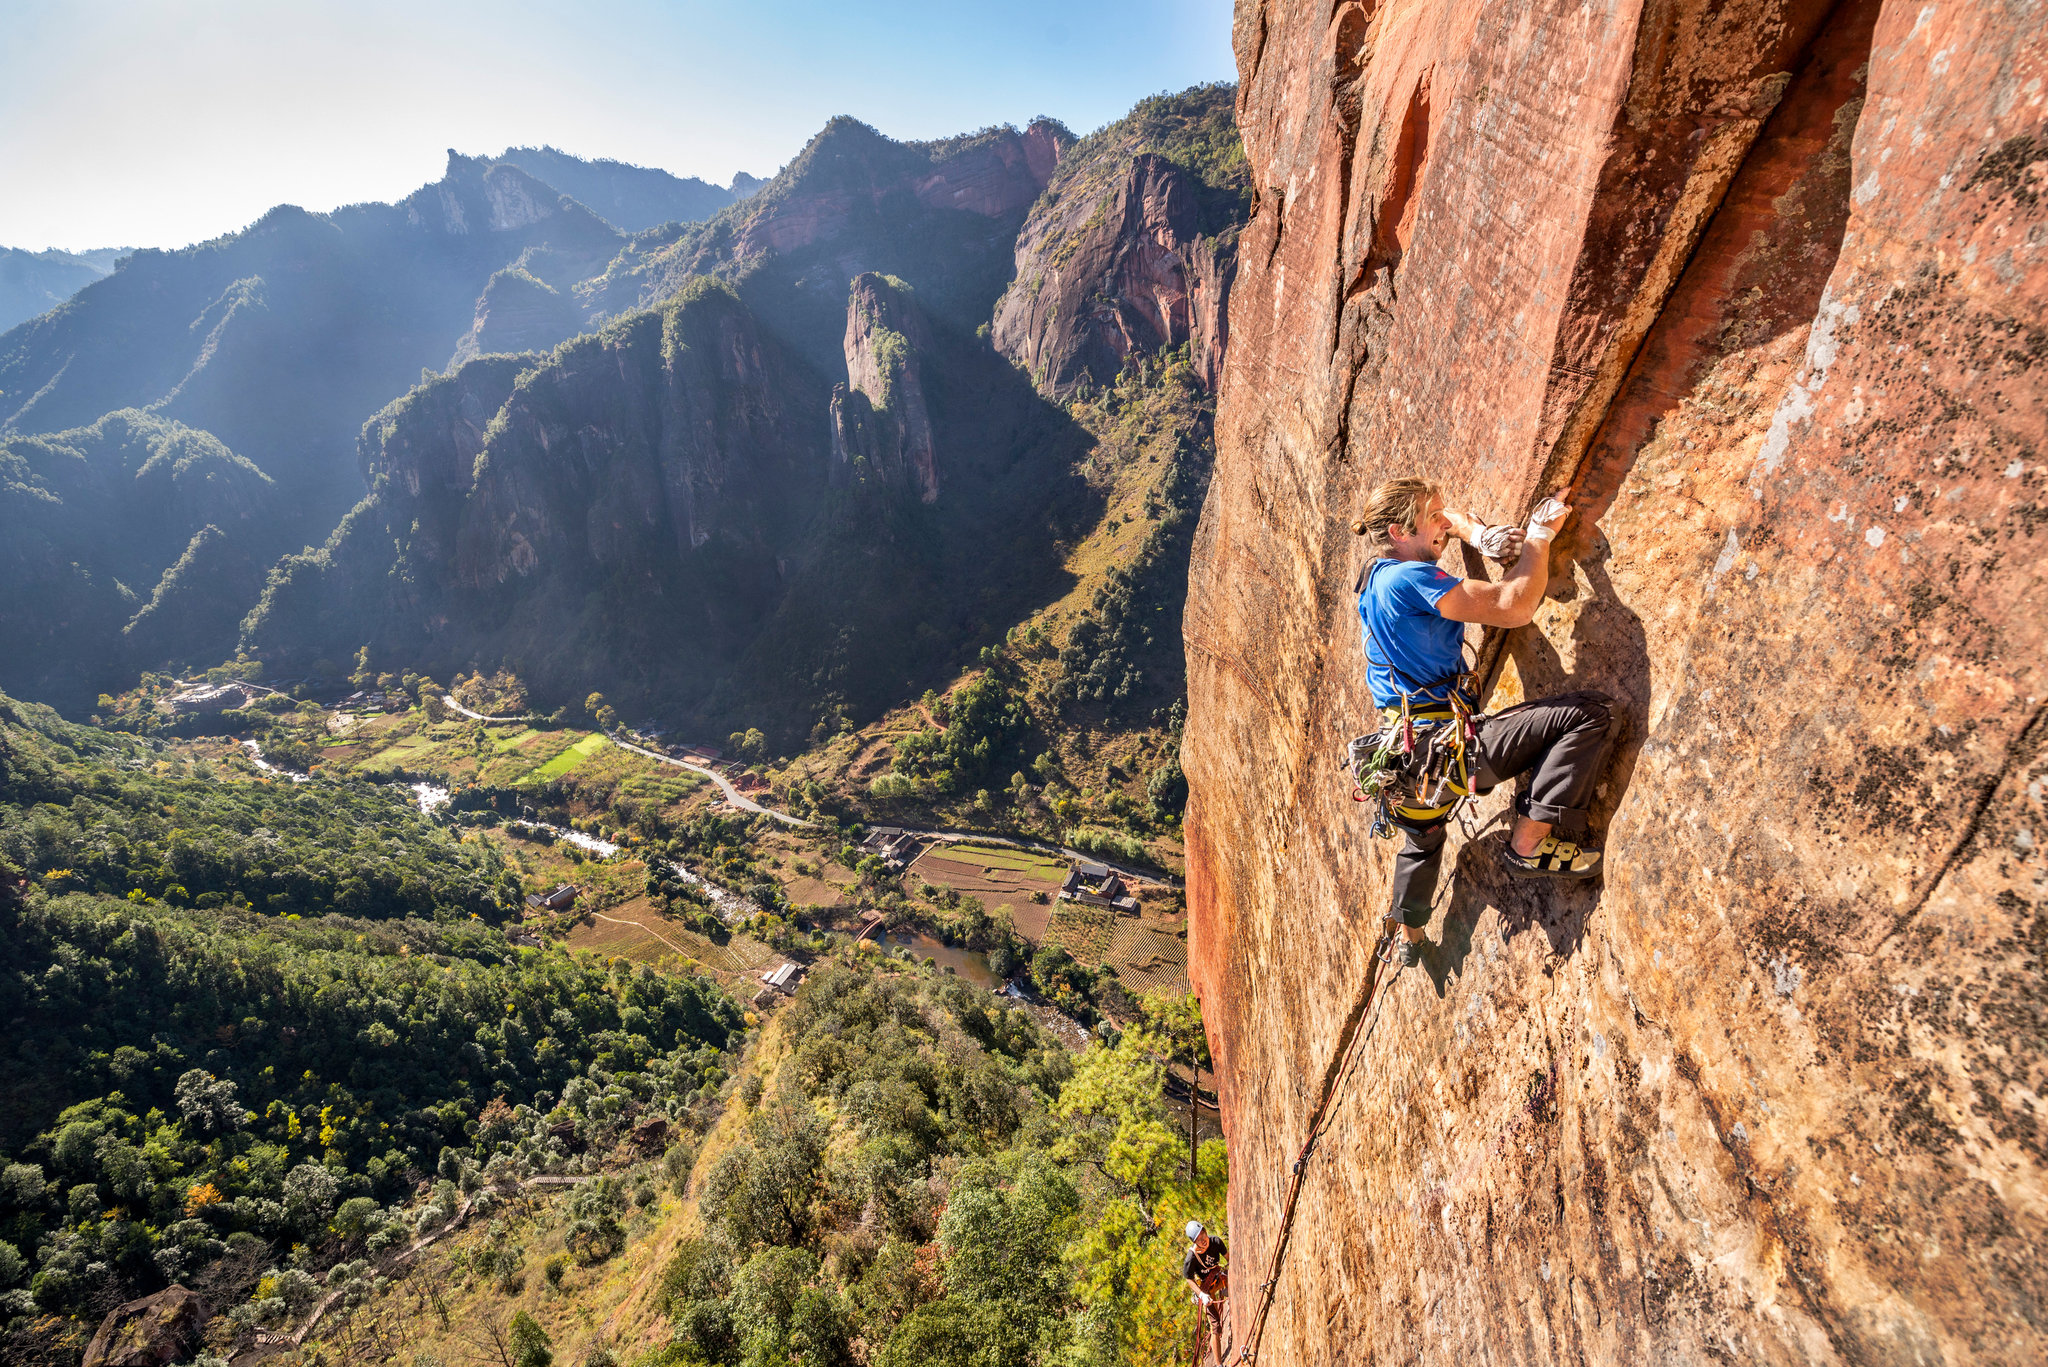 Unexplored' China? Not for Long, the Way These Climbers Are Going ...